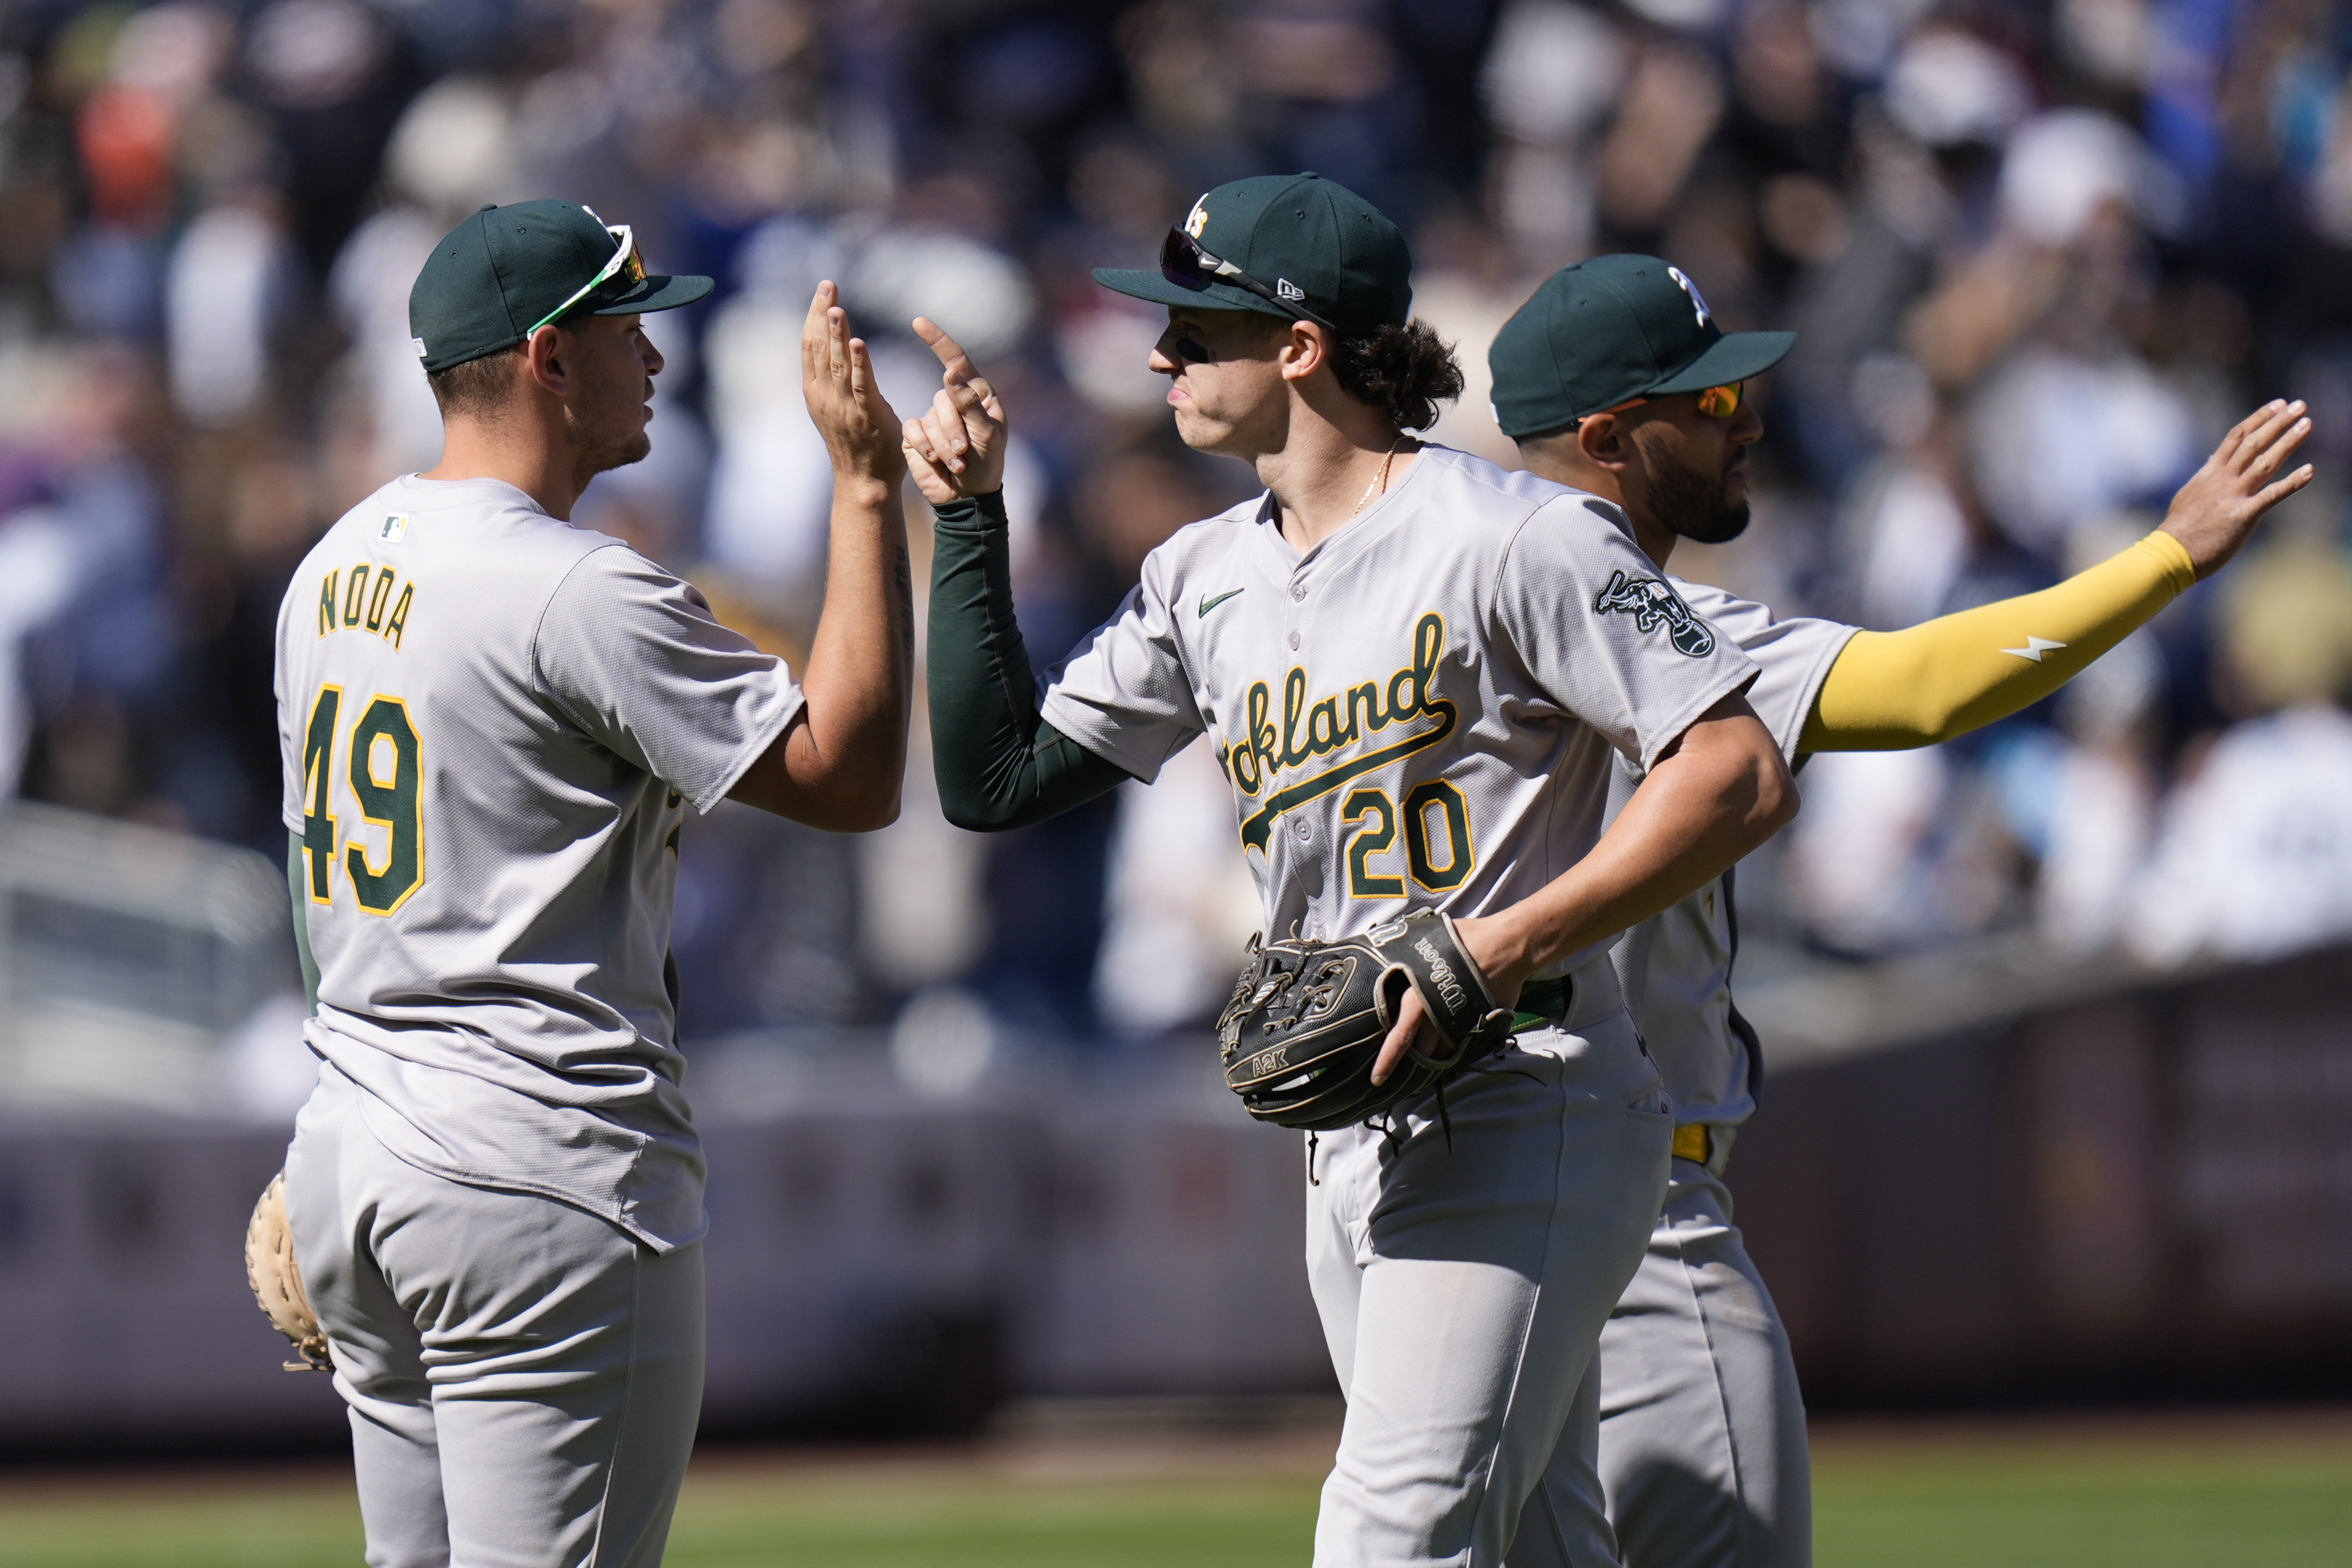 gelof hits a 2-run homer in the 9th to lift a's over yankees 2-0 after 1st-inning ejection of boone